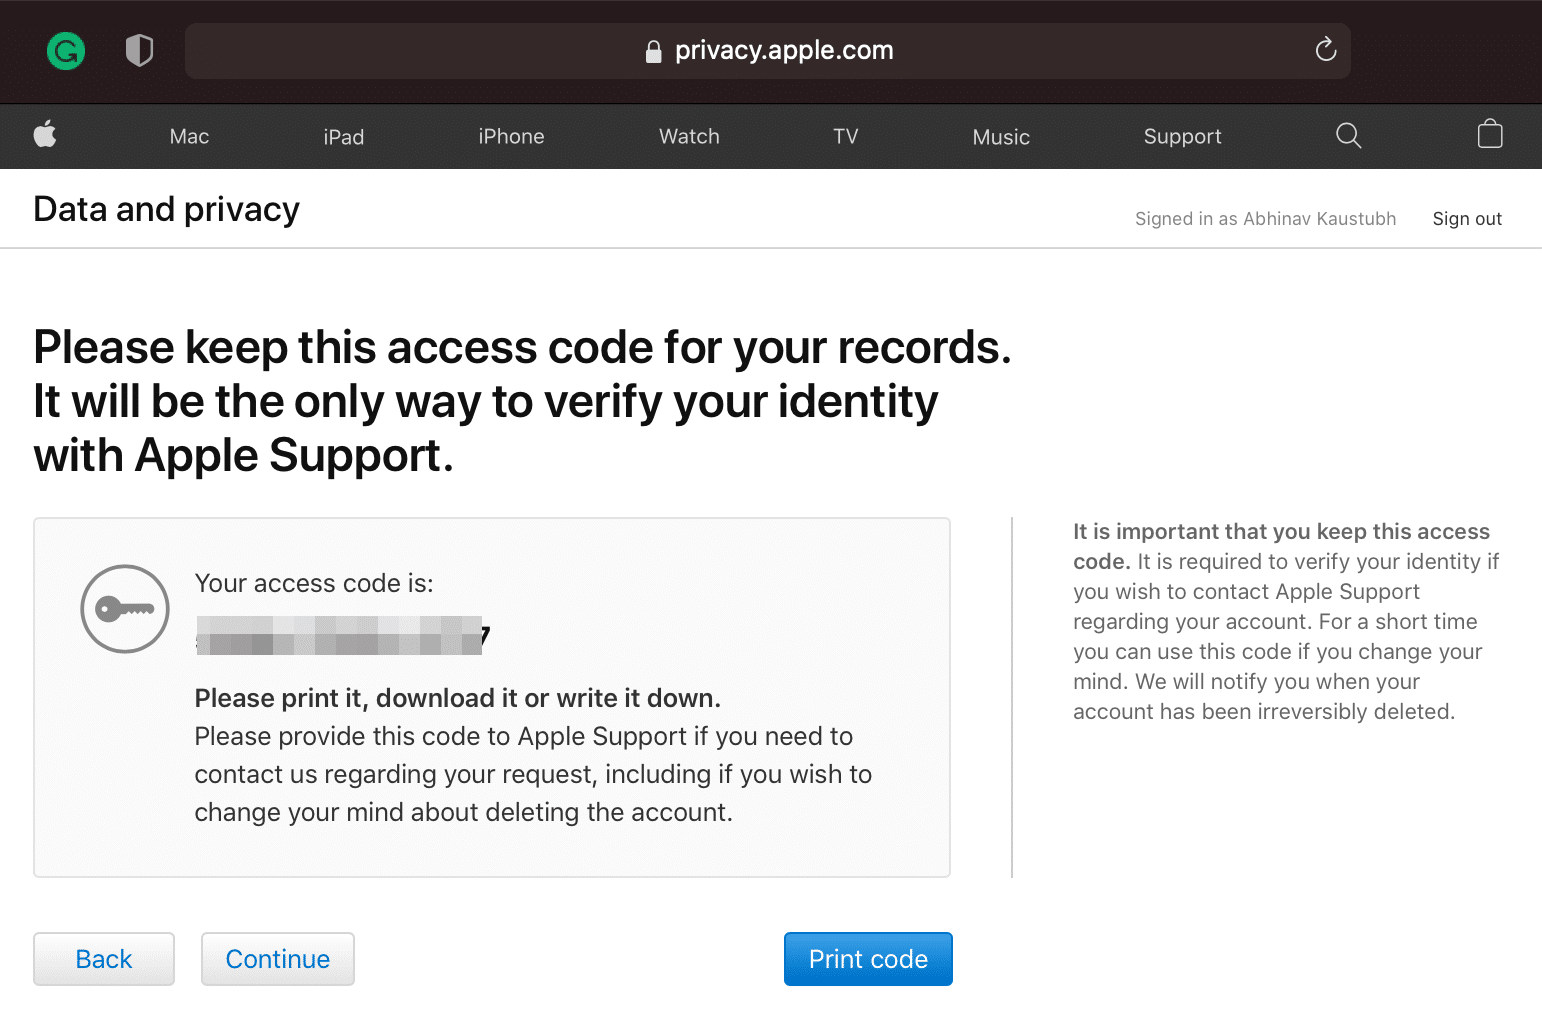 Copy or print the access code to delete Apple ID account